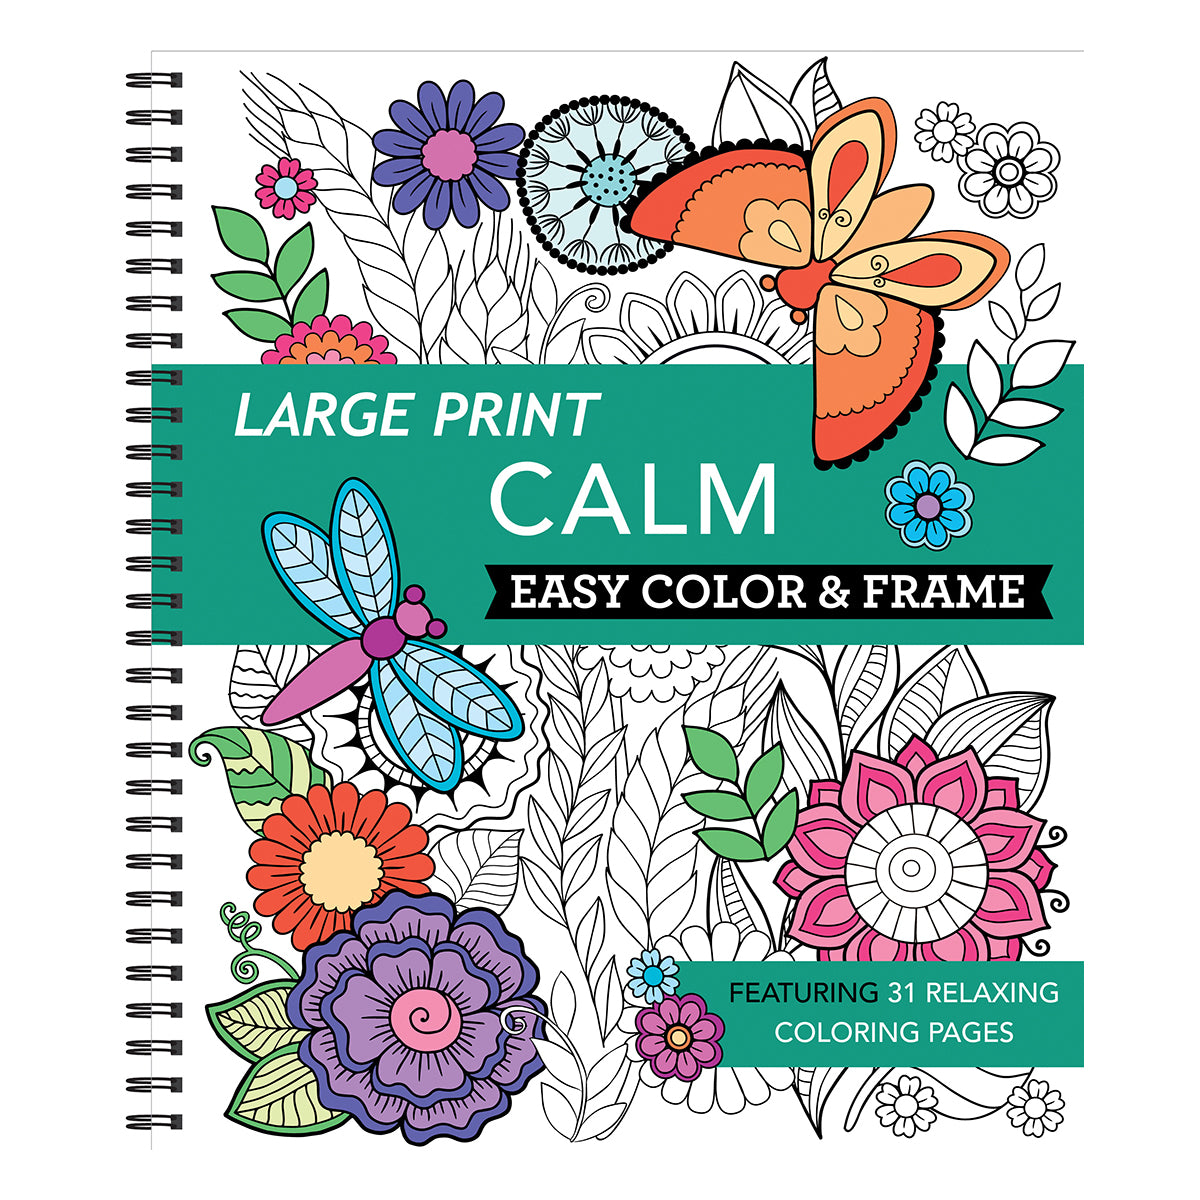 Large Print Easy Color & Frame  Calm Stress Free Coloring Book